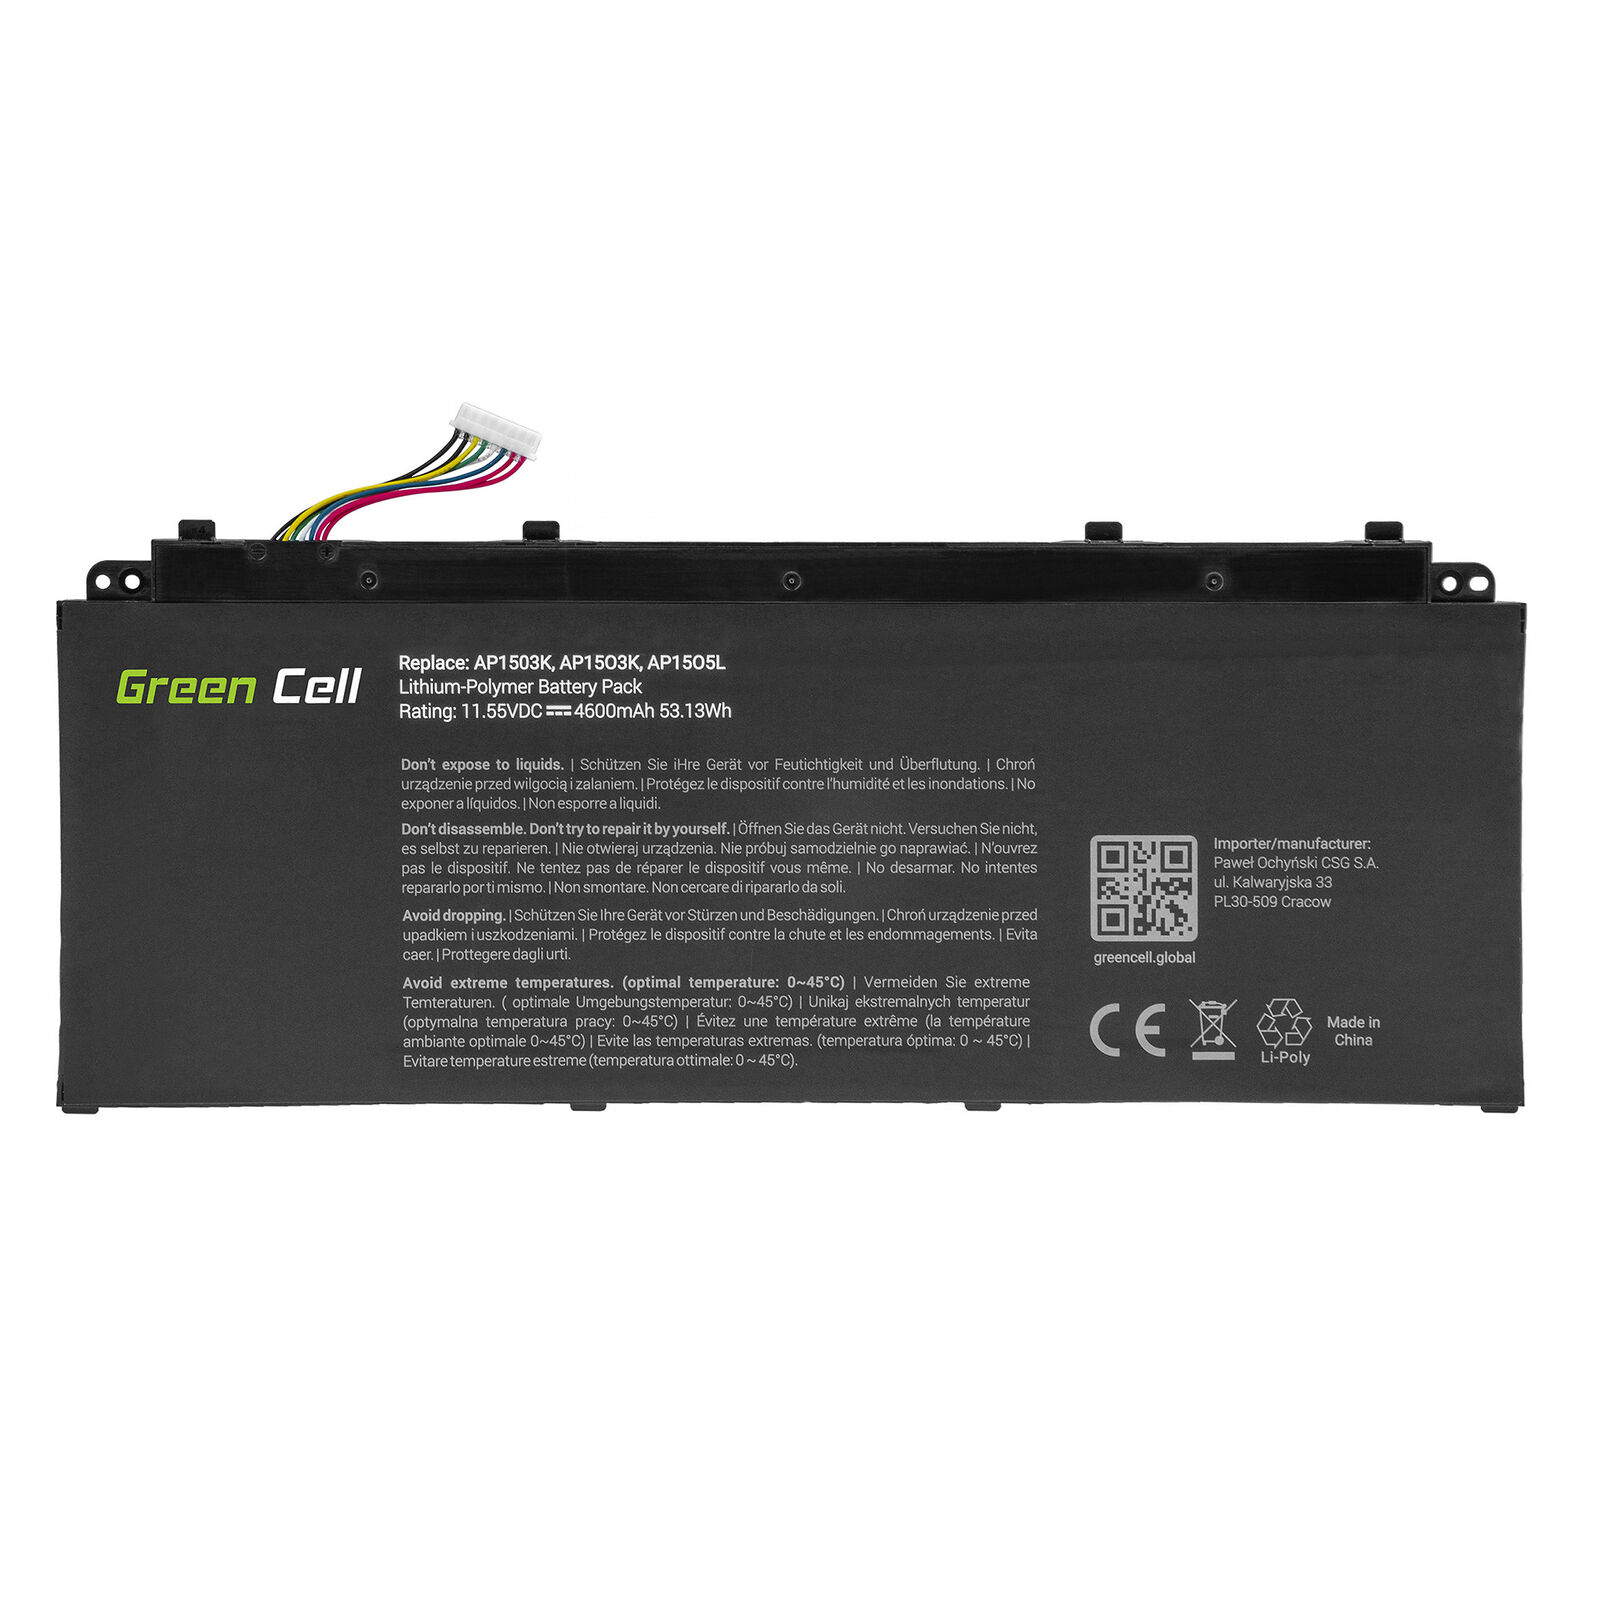 AP1503K AP1505L AP15O3K AP15O5L Acer Aspire S 13 Swift 1 Swift 5 compatible battery